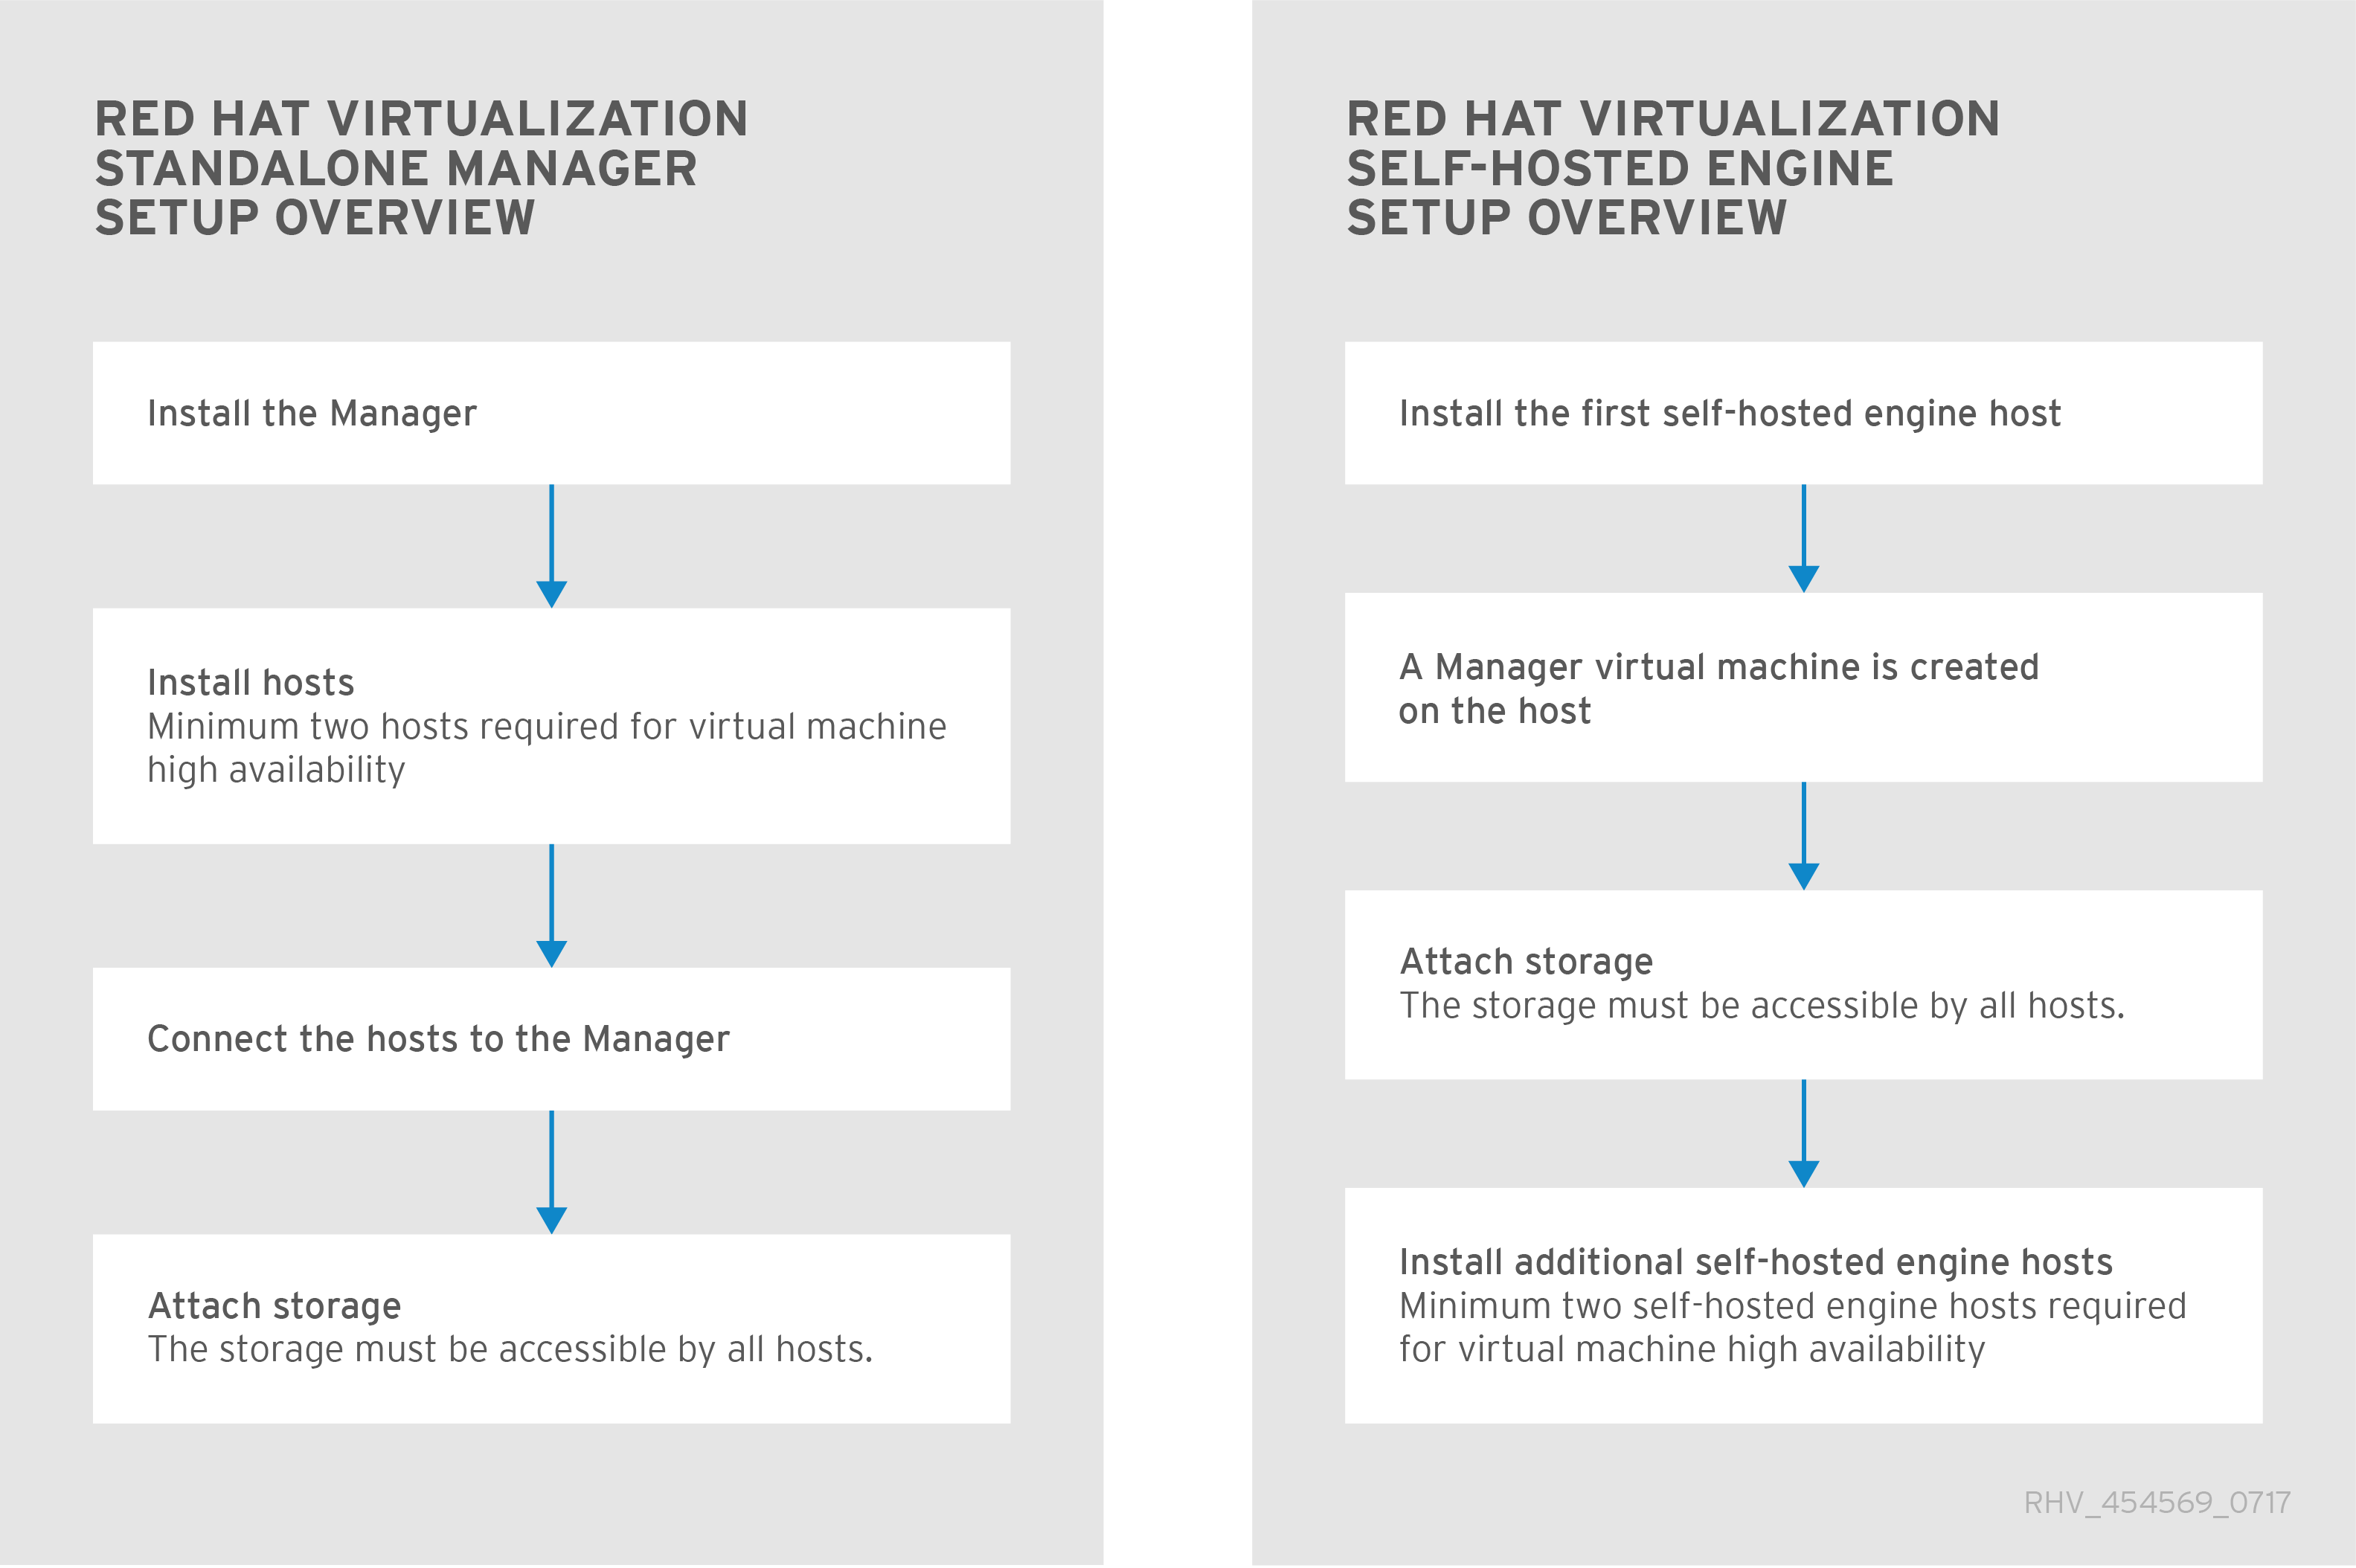 Setup Overview of Red Hat Virtualization